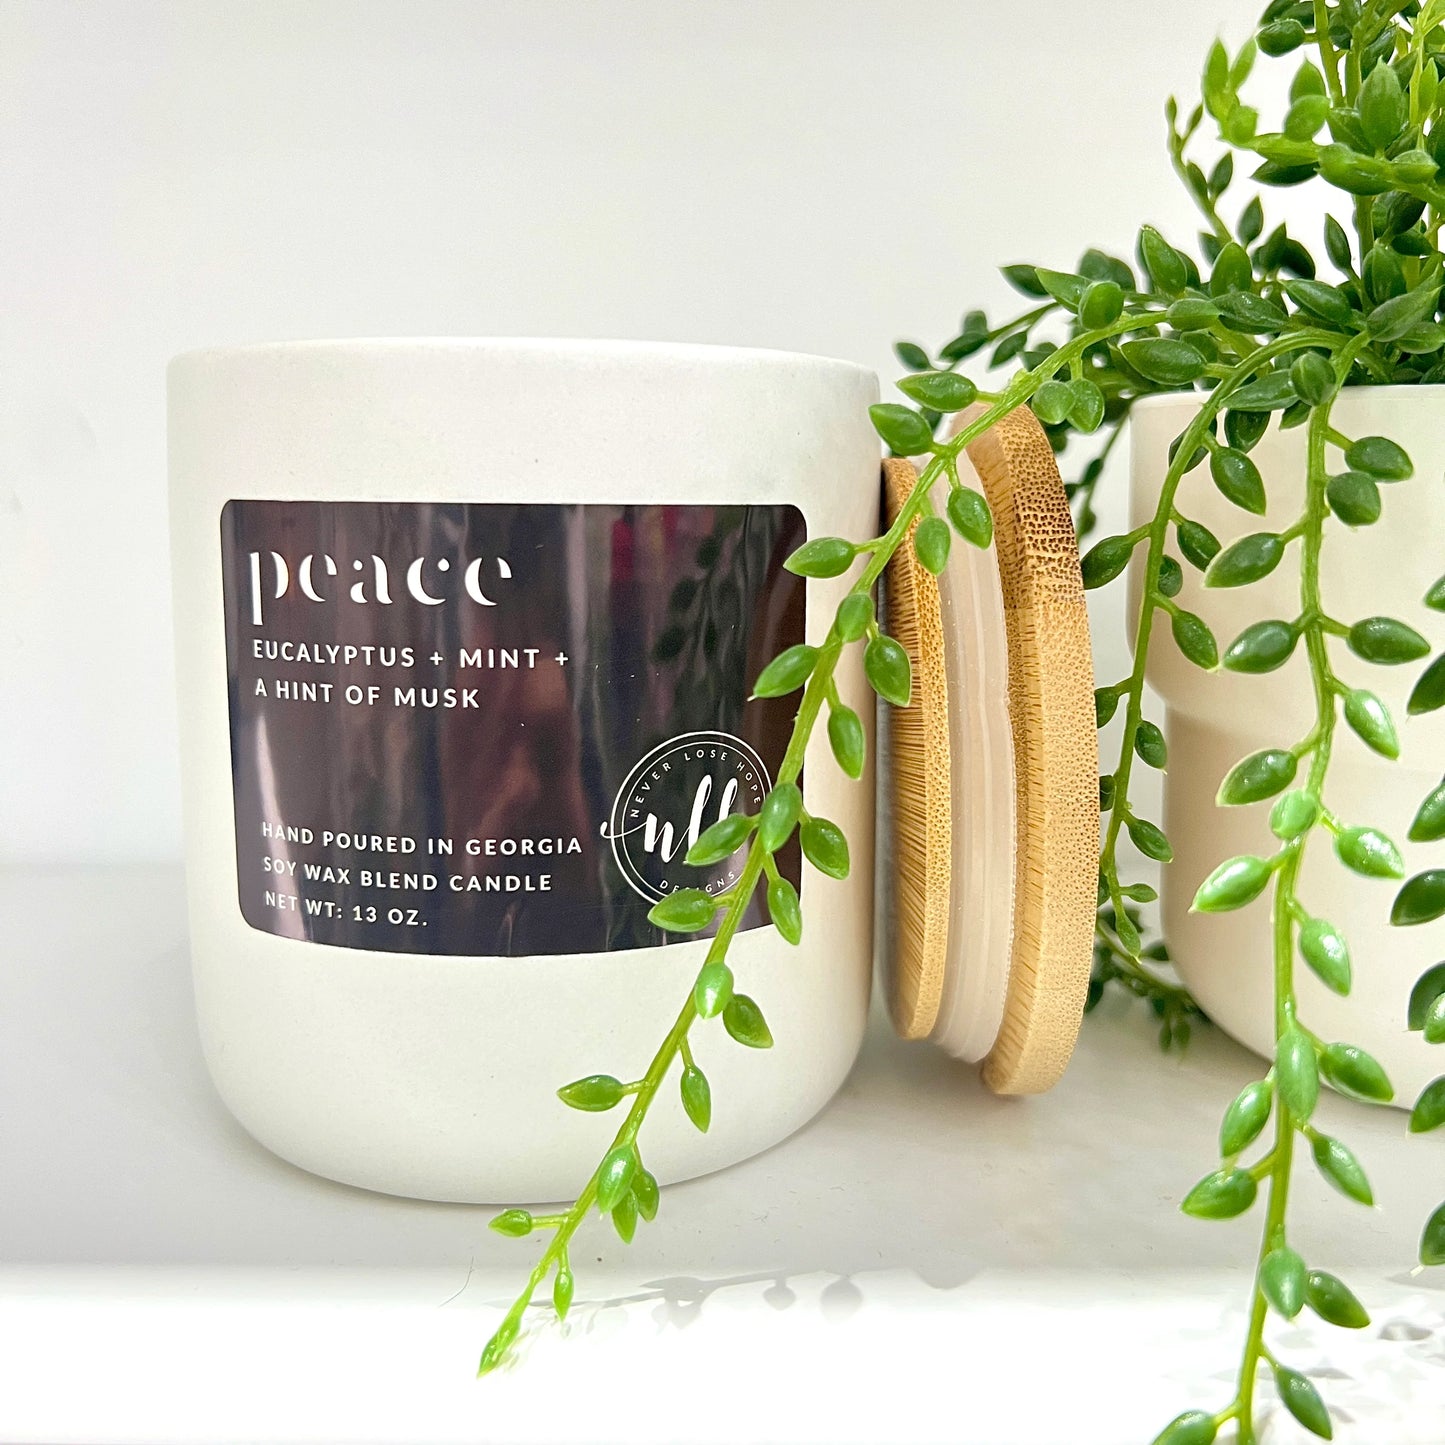 Never Lose Hope® Soy Wax Blend Candle- "Peace"